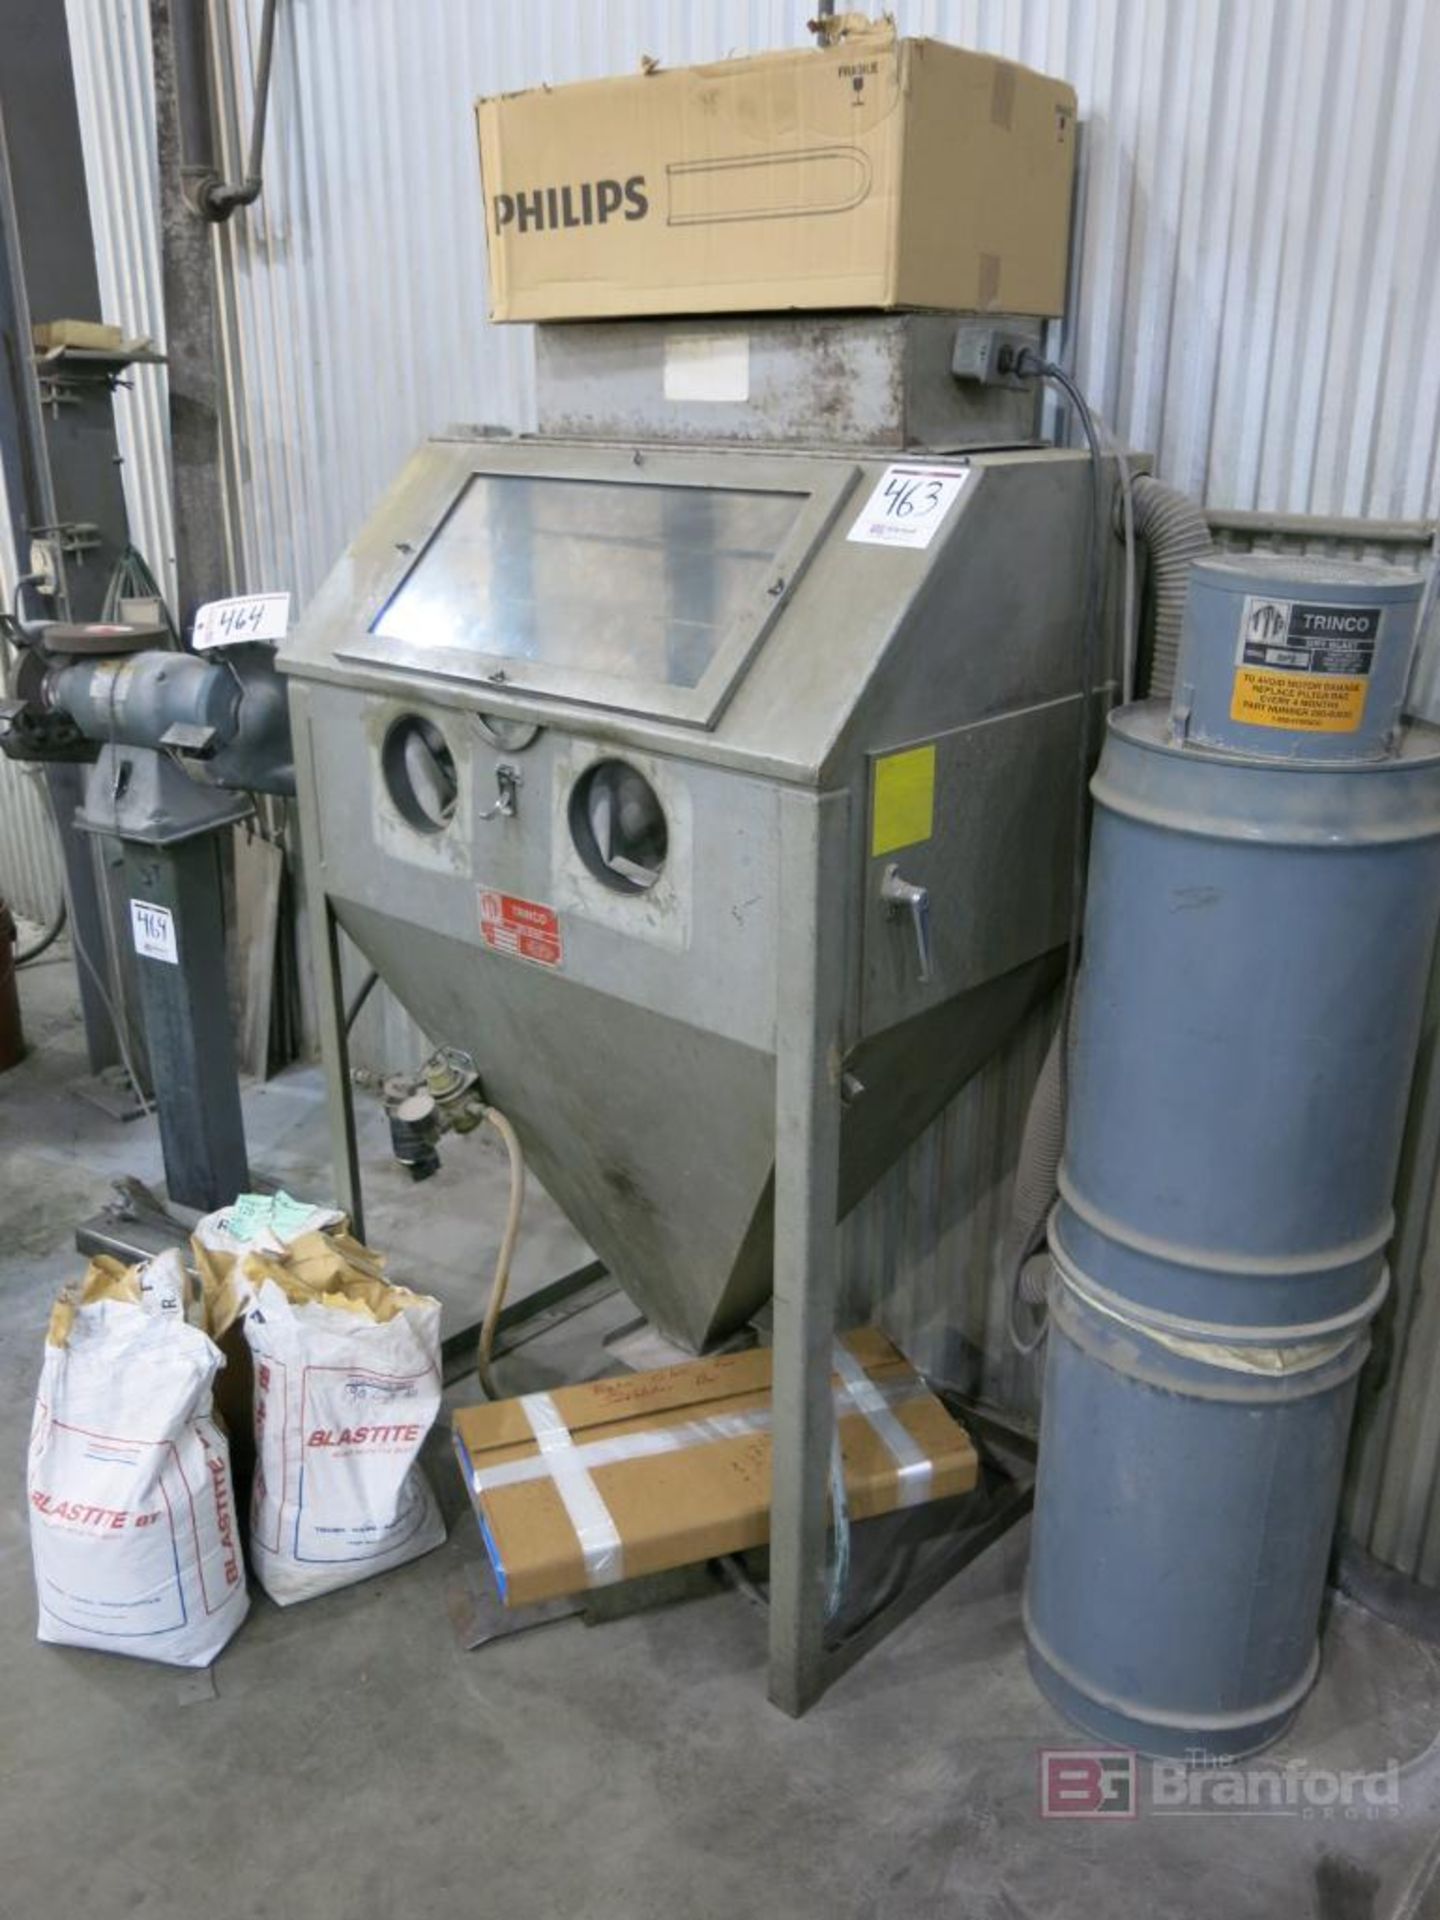 Trico 36" Sand Blast Cabinet w/ Trinco BP2 Dust Collector - Image 2 of 3